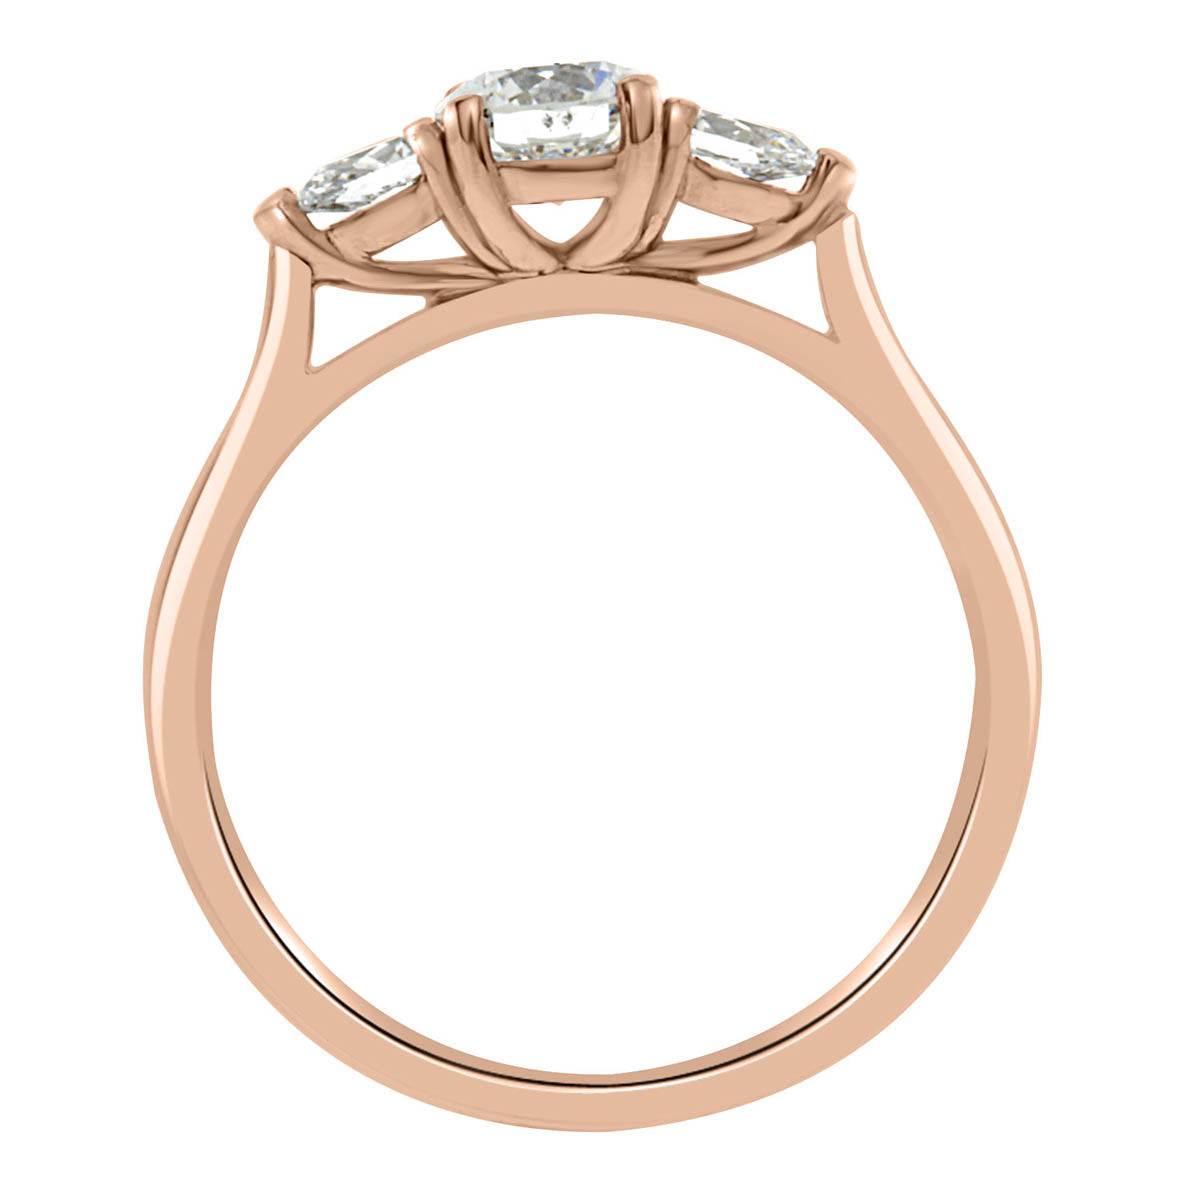 Round and Pear Diamond Ring in rose gold standing upright